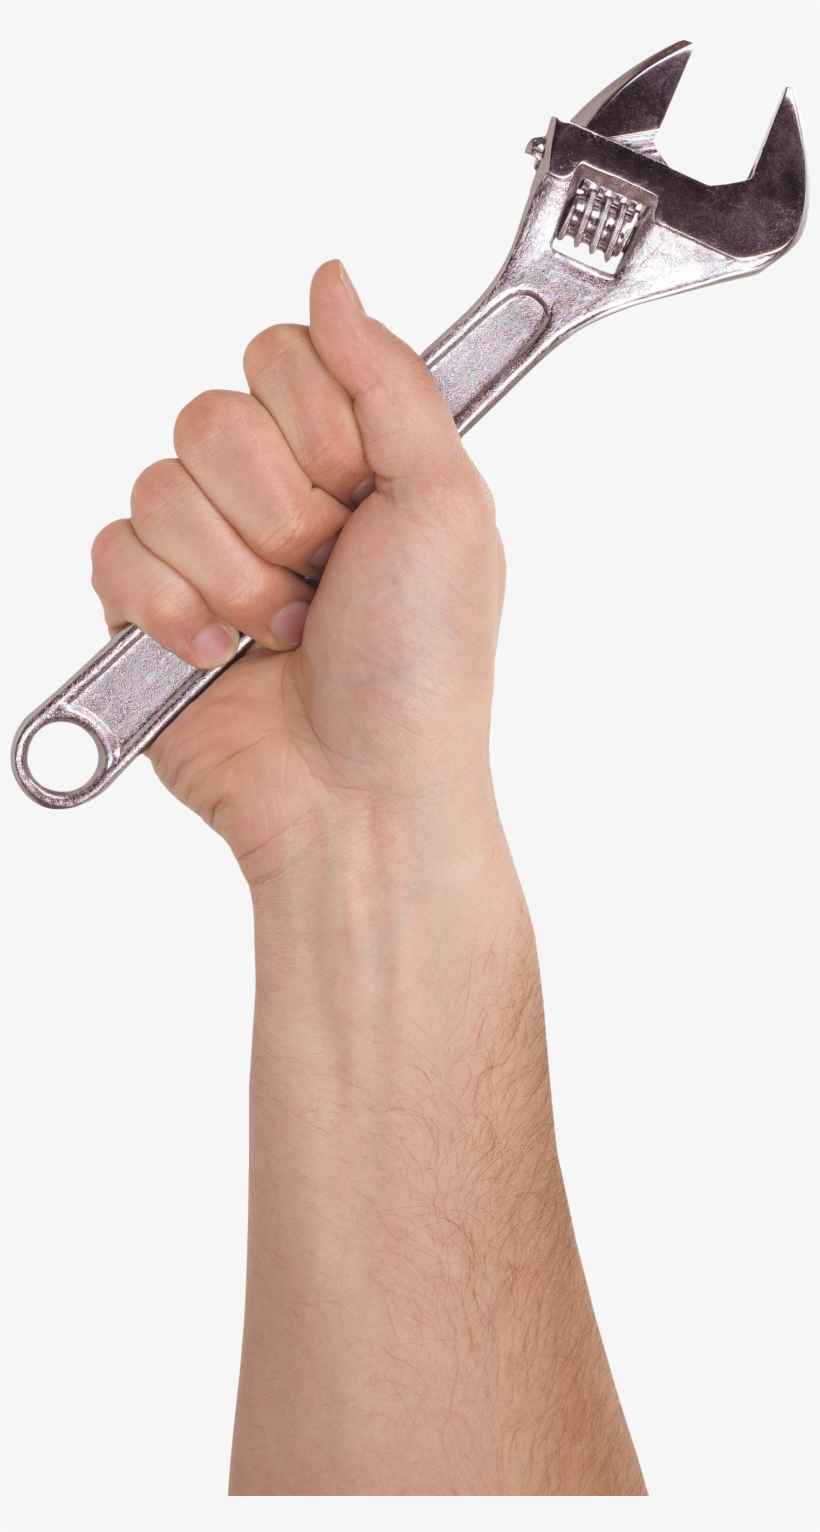 Wrench Hand Png, transparent png #722315